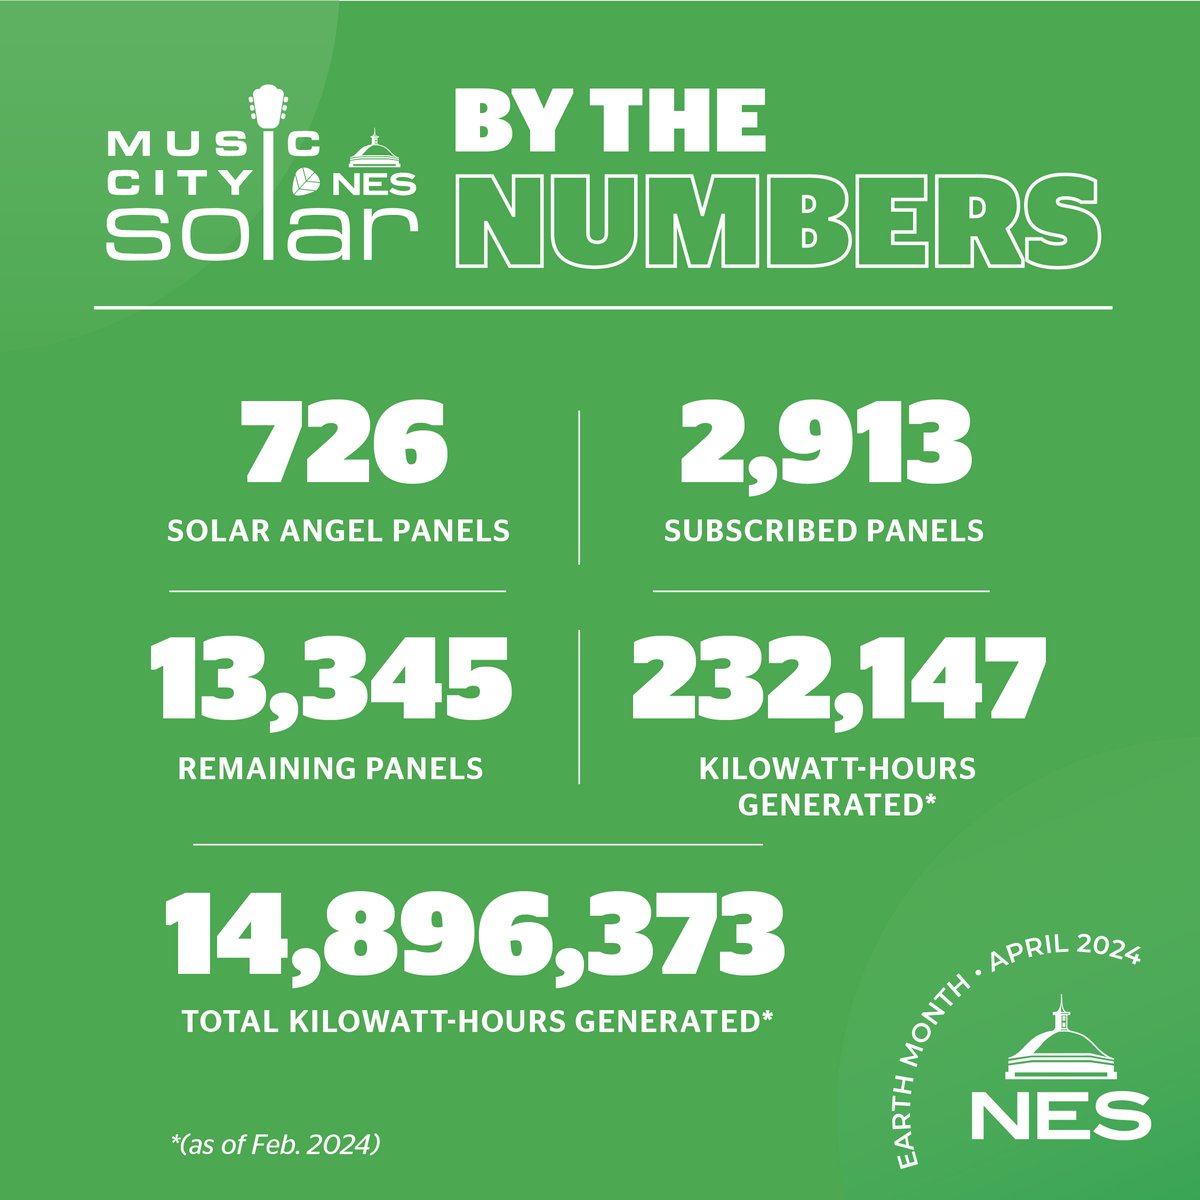 Going green feels electric! Check out some of our recent numbers from Music City Solar, which allows customers the opportunity to power their homes with solar energy panels. Learn more about Music City Solar here bit.ly/4cOn6Dv.